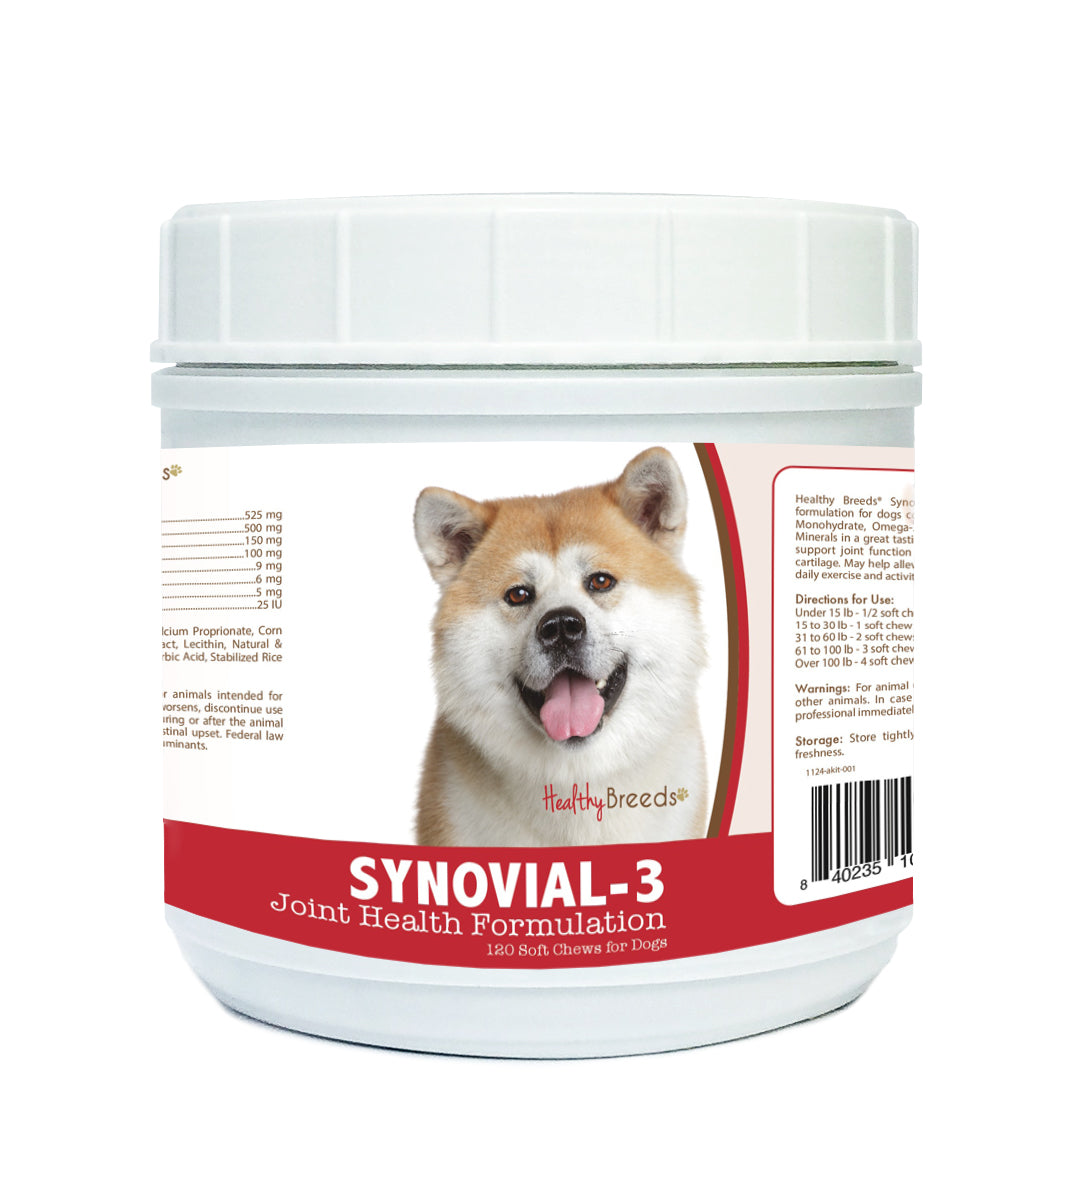 Akita Synovial-3 Joint Health Formulation Soft Chews 120 Count